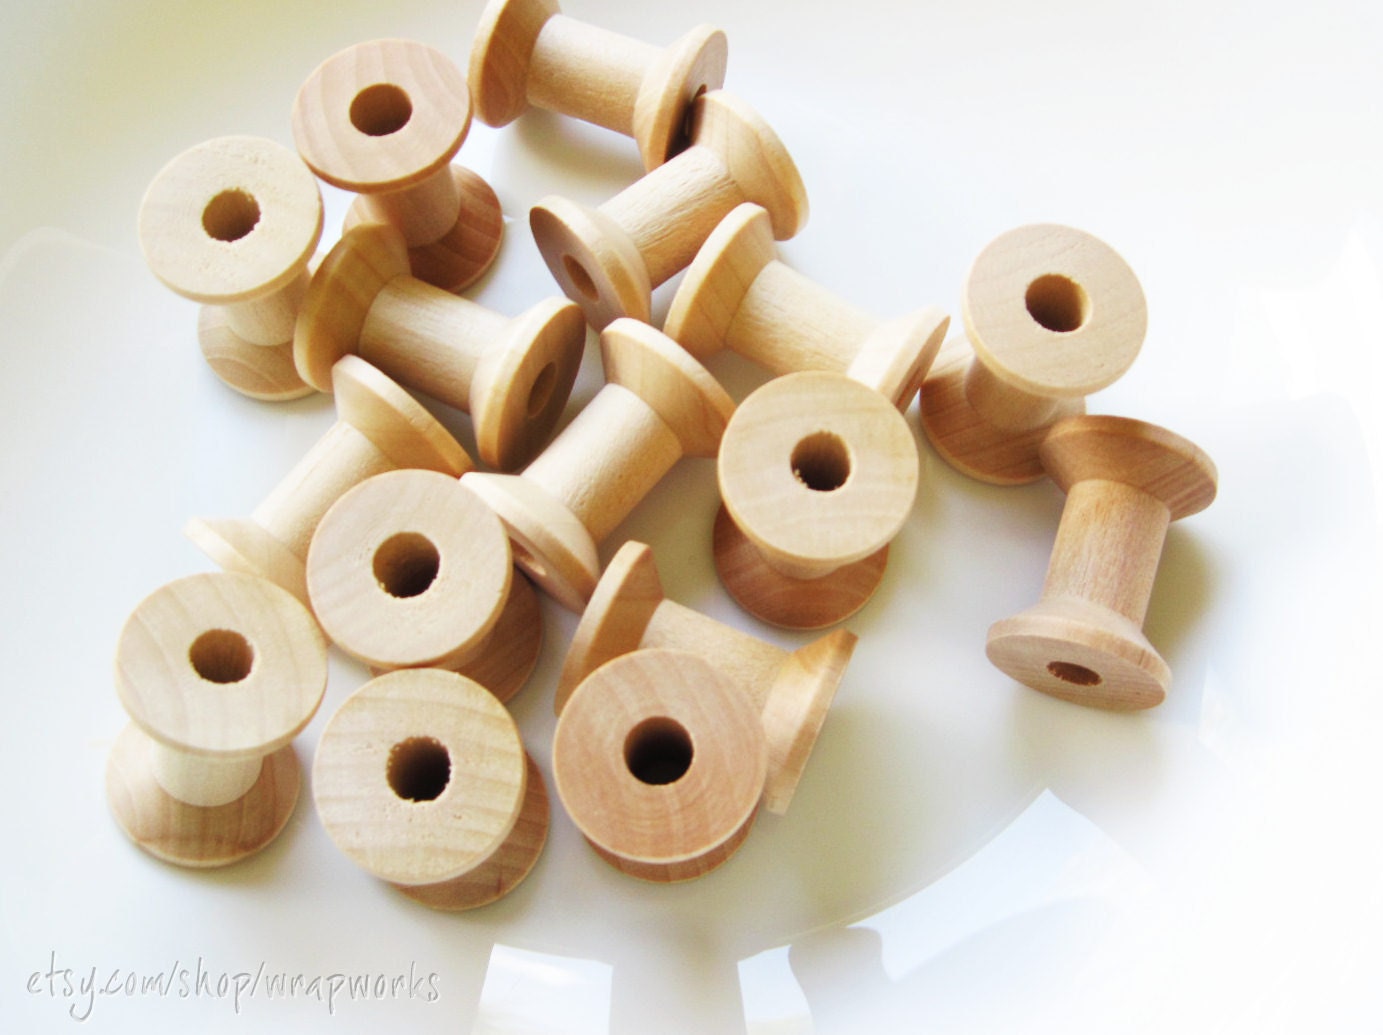 50 Wooden Spools 1 1/8  x 7/8 inch , Wood Bobbin for Crafting, Twine, Thread, Sewing or Decor - wrapworks